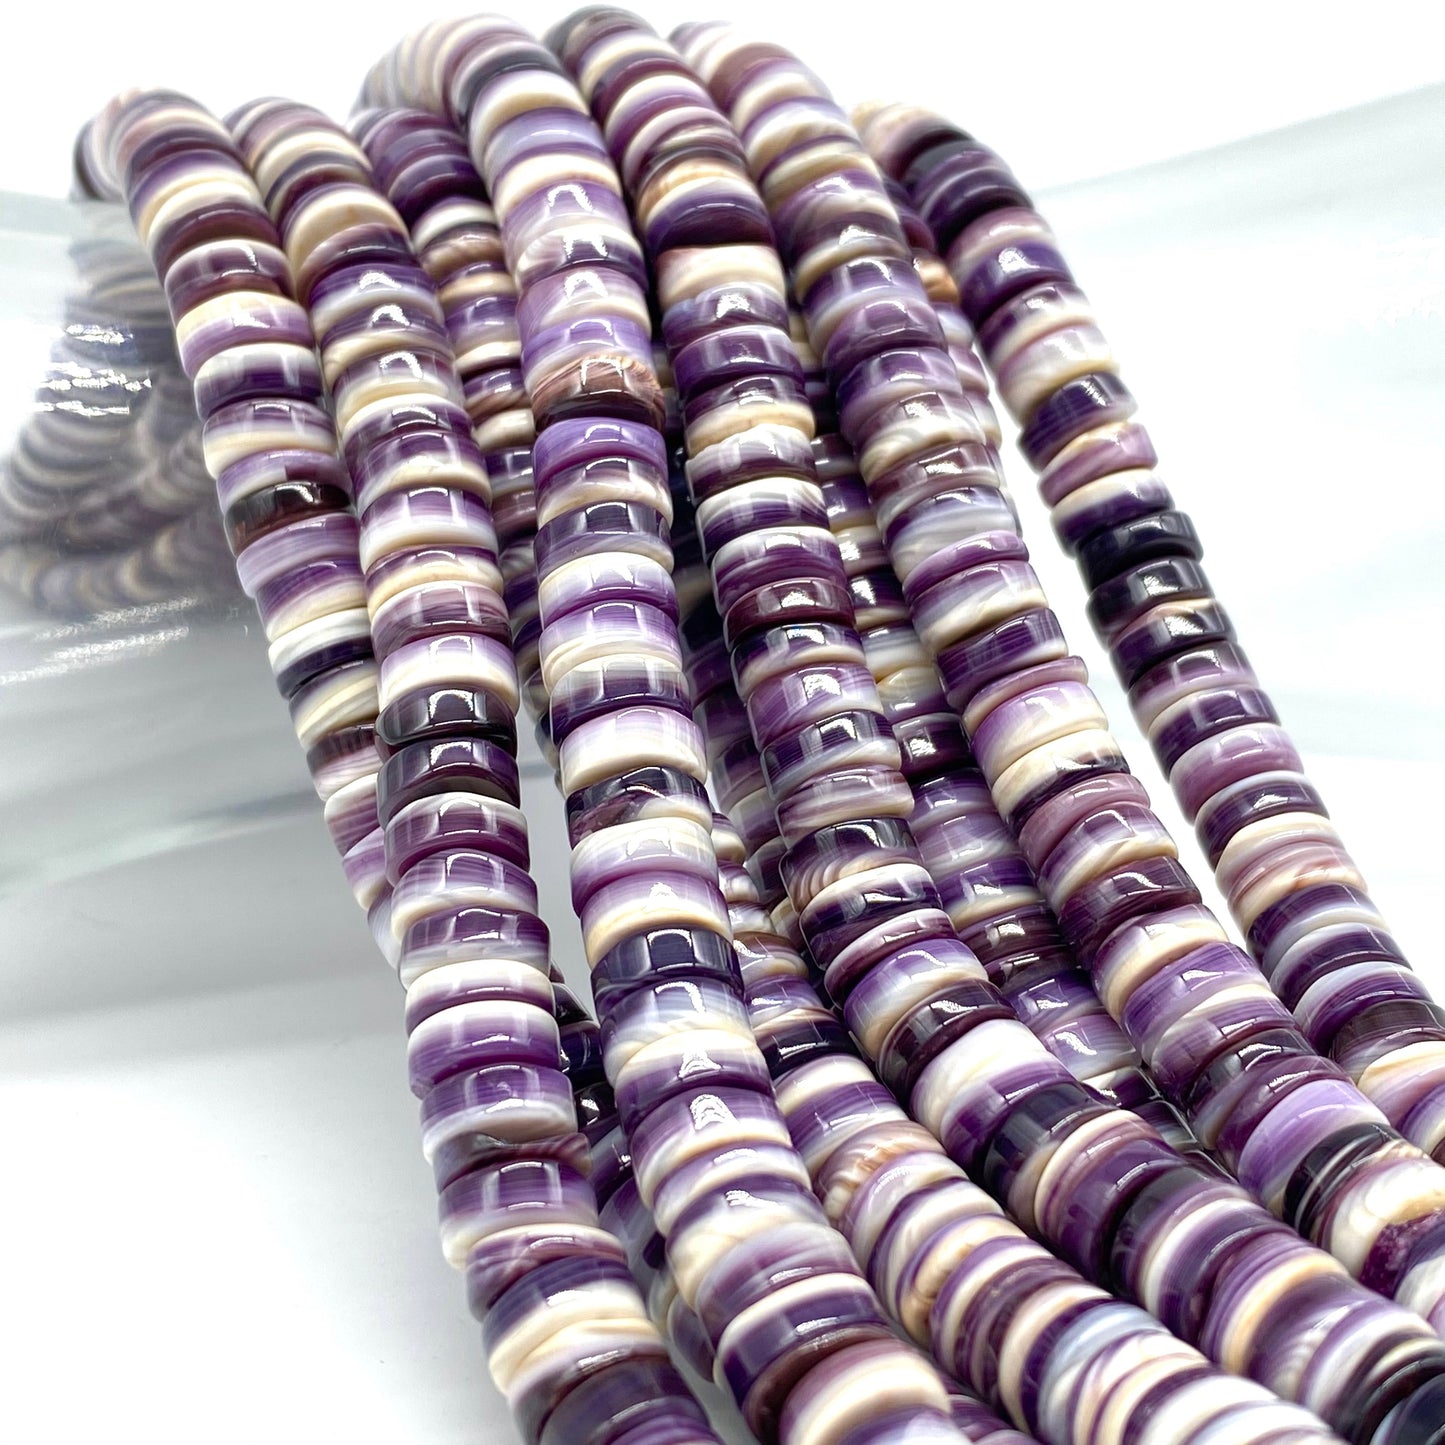 Dark Wampum Shell Beads From New England/ Rhode Island (America's First Currency From Year 1637-1673) Smooth Heishi For DIY Jewelry Making